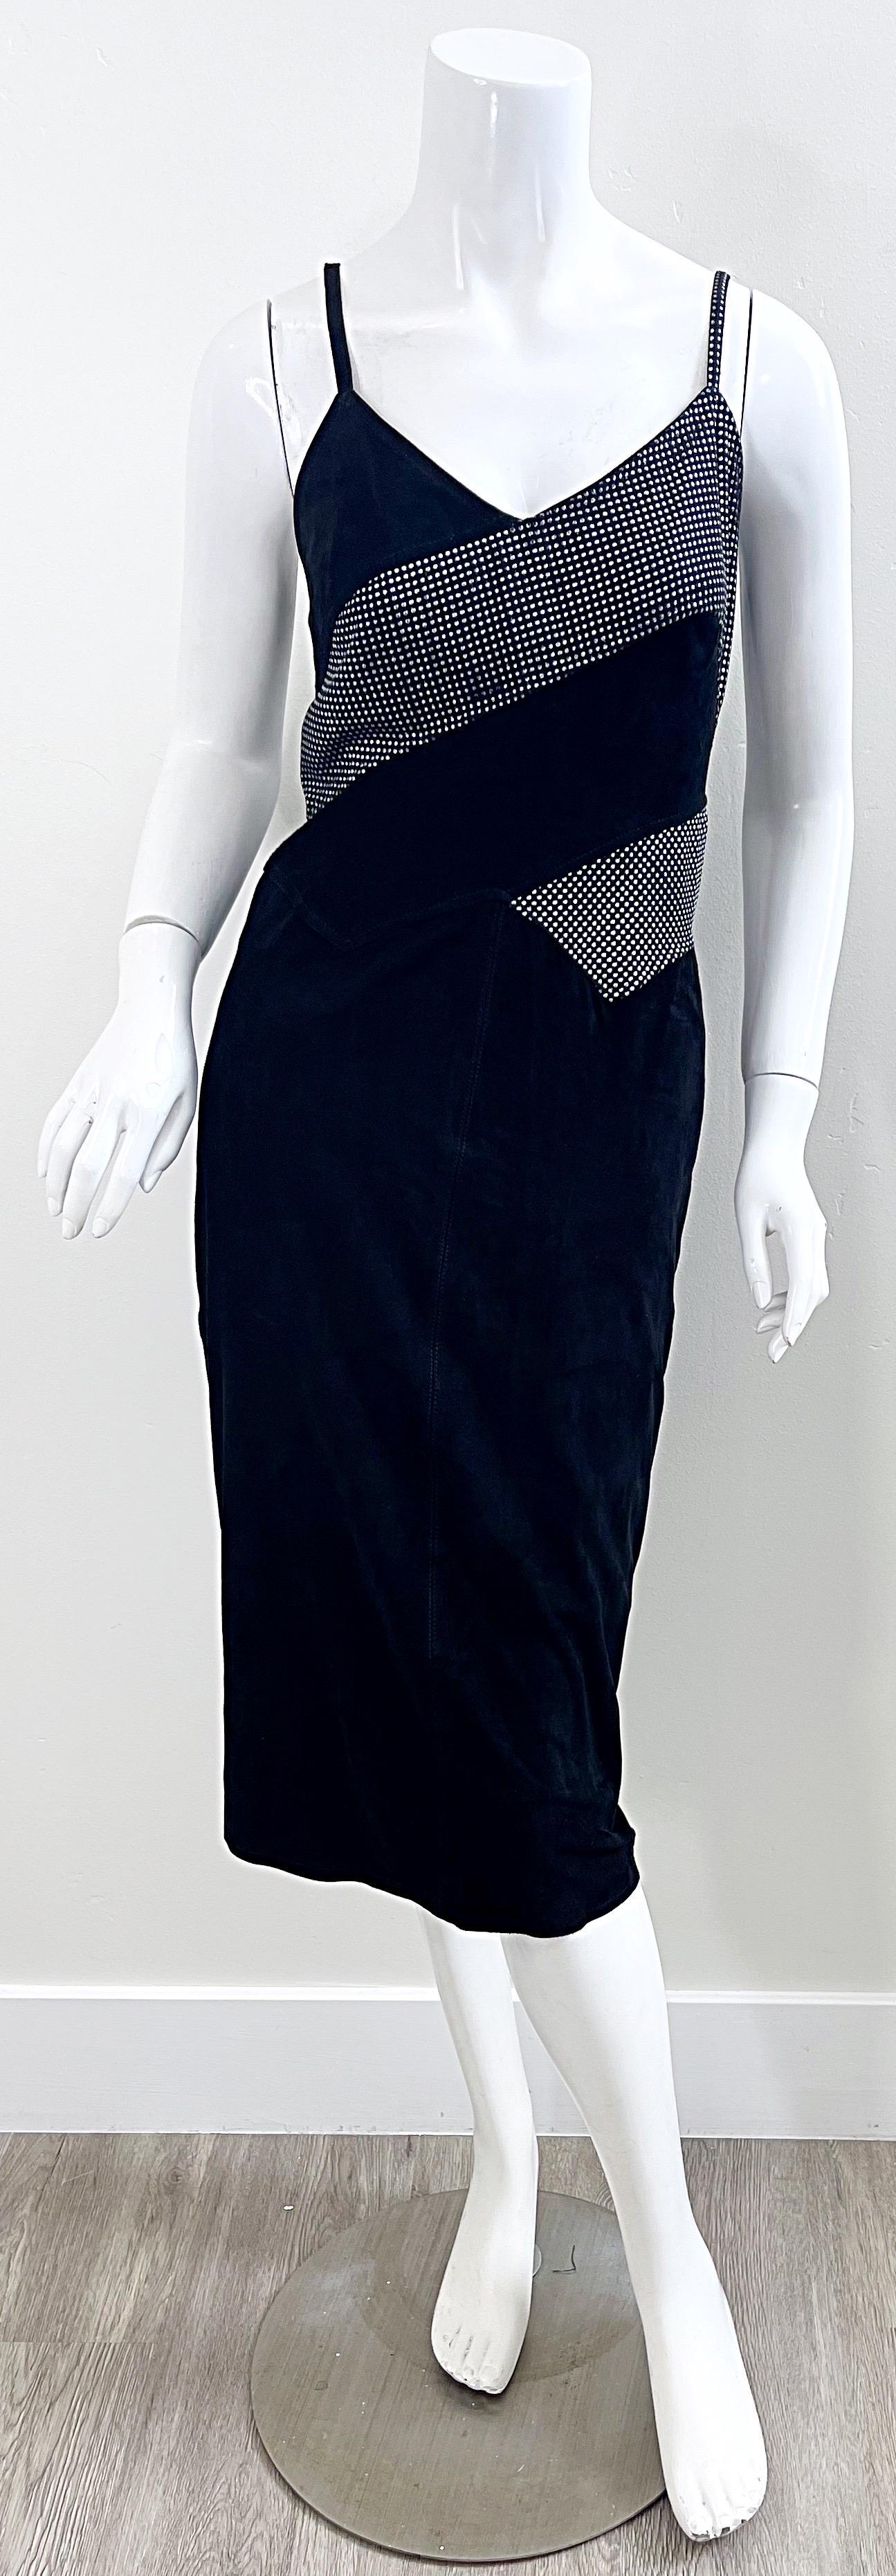 Fendi 1980s Fendissime Black Silver Suede Leather Vintage 80s Hand Painted Dress For Sale 11